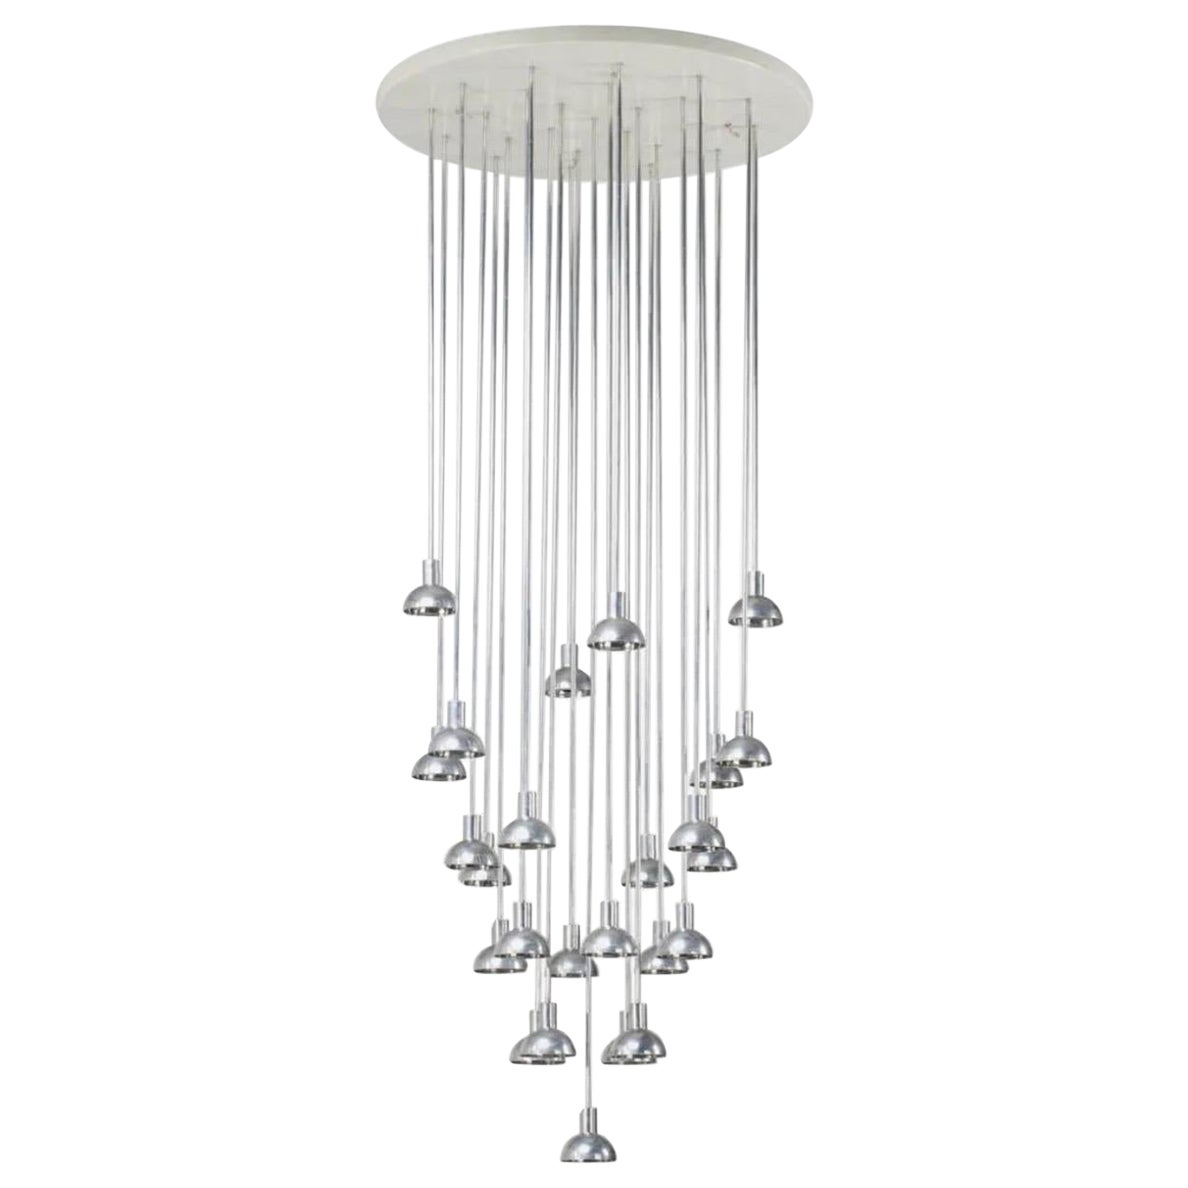 Multi-Pendant Modern Chandelier Light Fixture, Verner Panton, 1970s, Finland. Mid-Century Modern Space Age Chandelier. Scandinavian. Circumference: approximately 28.”  Total length/height: approx. 68”